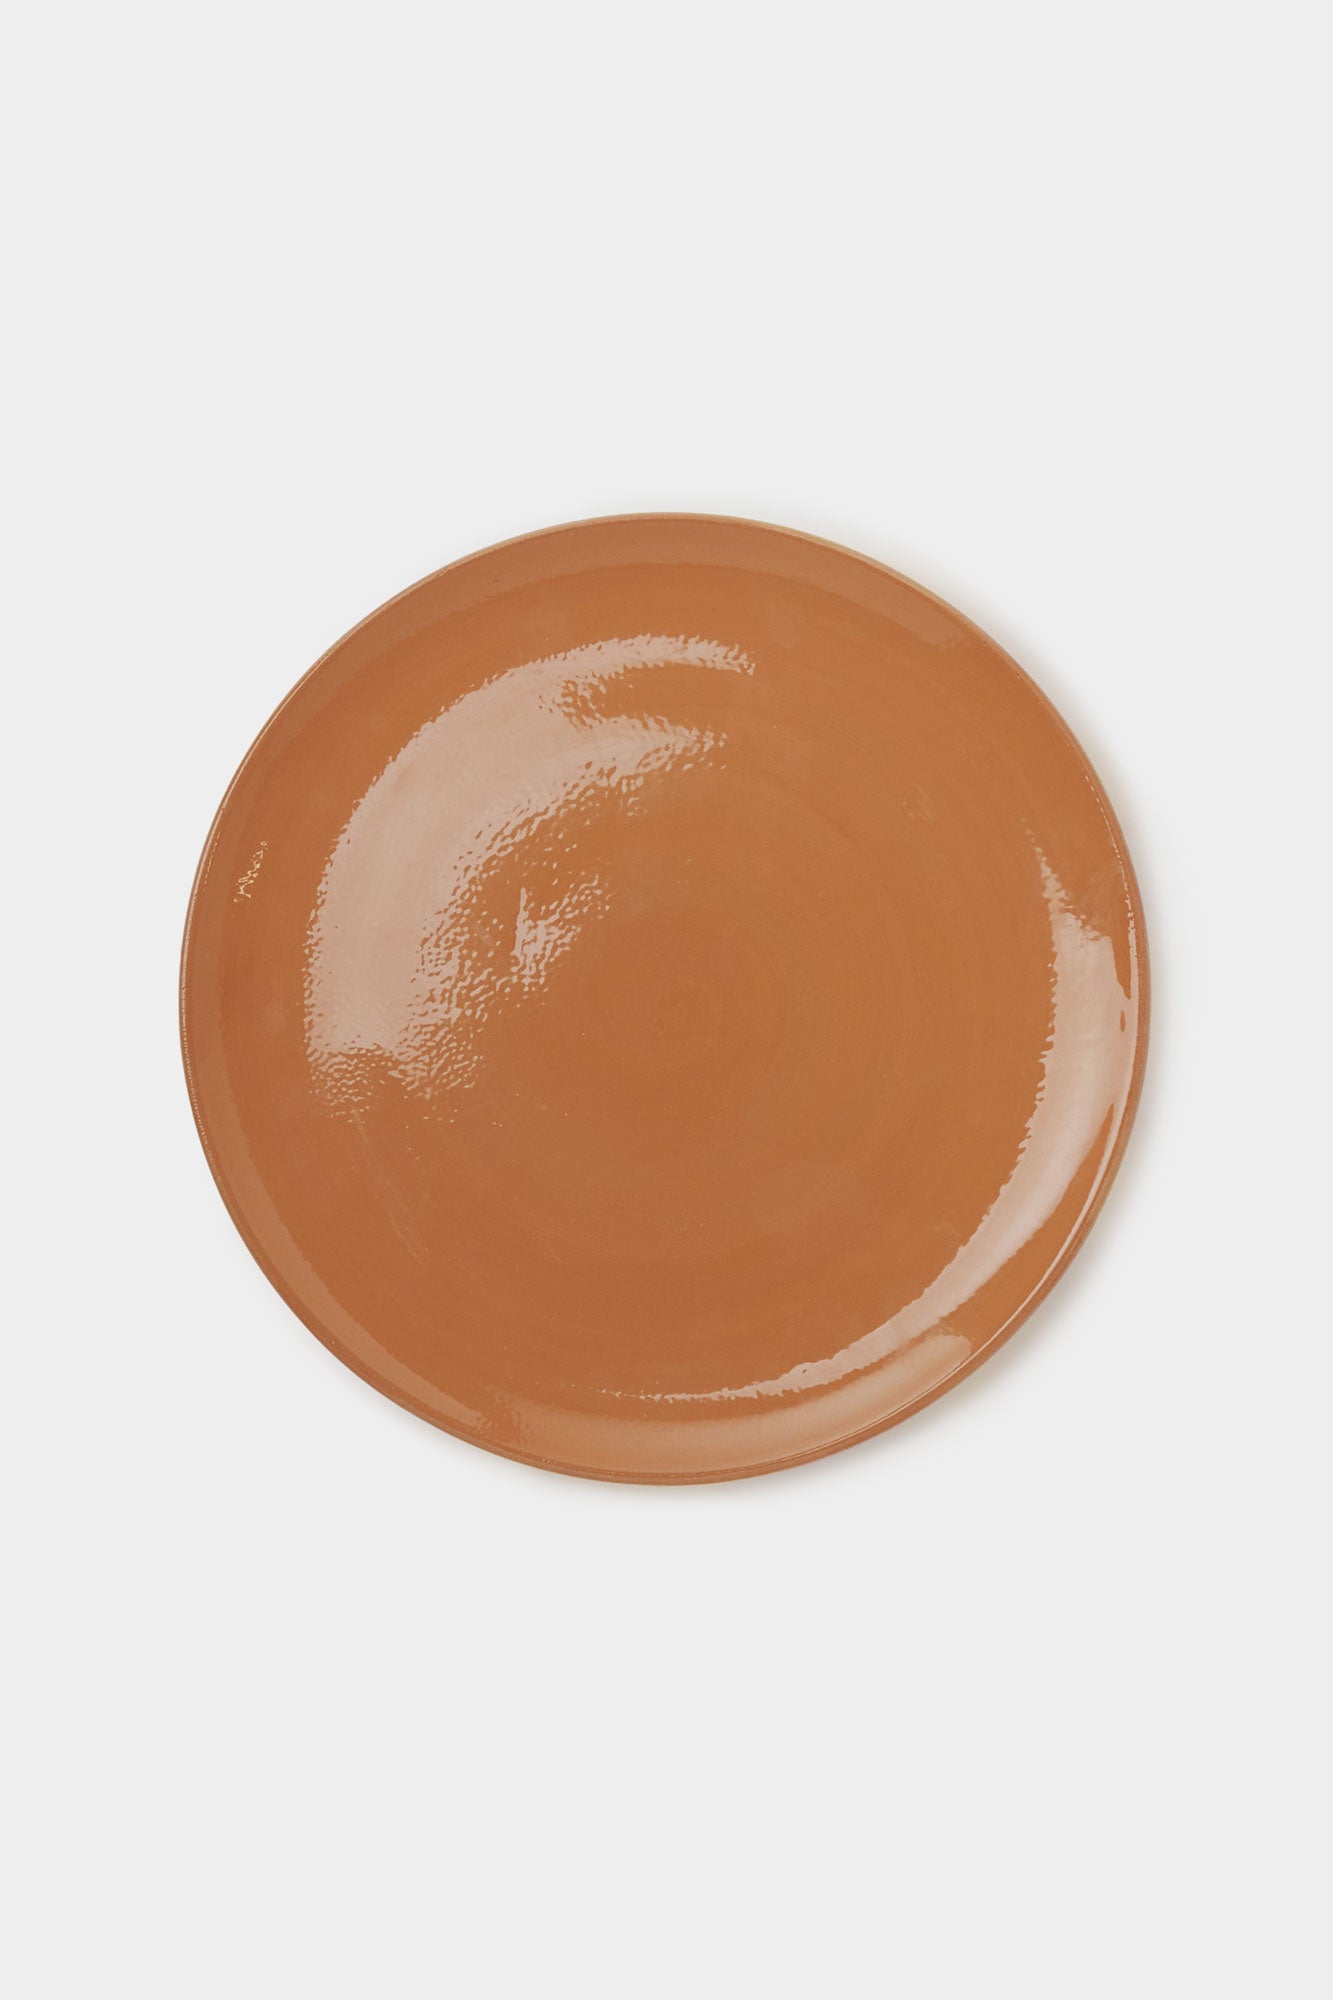 TERRACOTTA BELLISOTTO DINNER PLATE / yellow